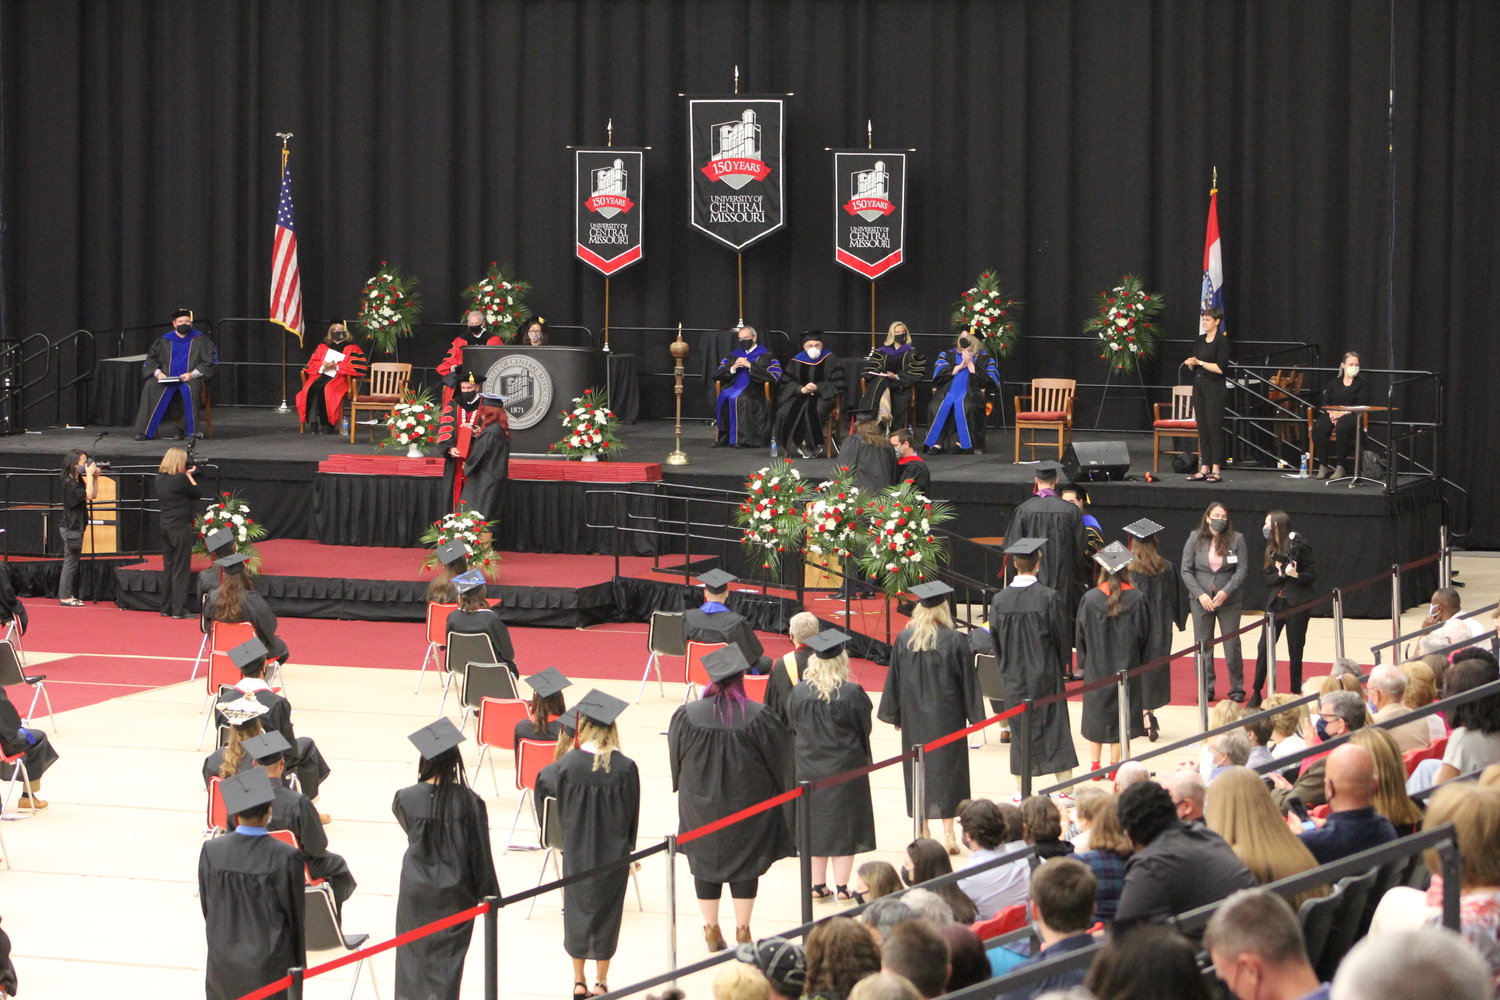 Graduates line up to have their names read before being presented with a diploma cover by President Roger Best.